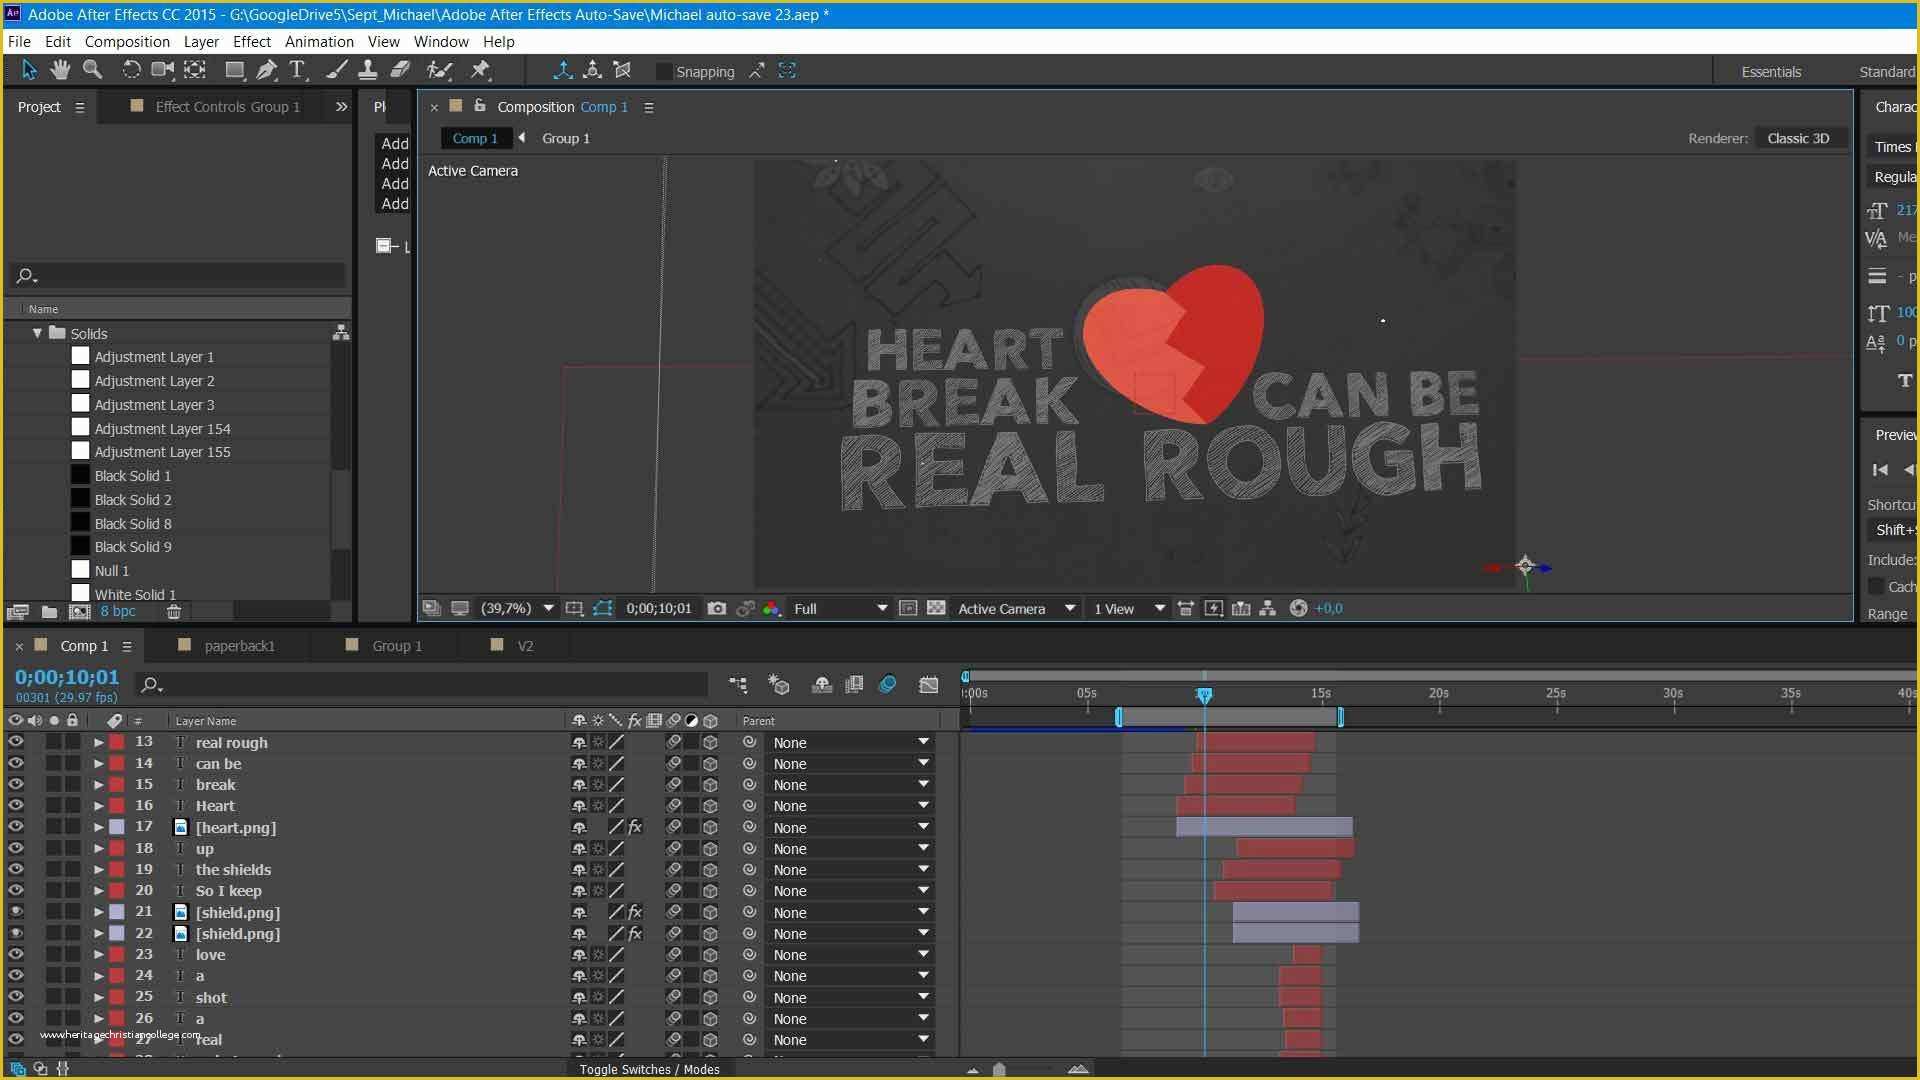 After Effects Lyric Video Template Free Of Program for Making Lyric Videos after Effects